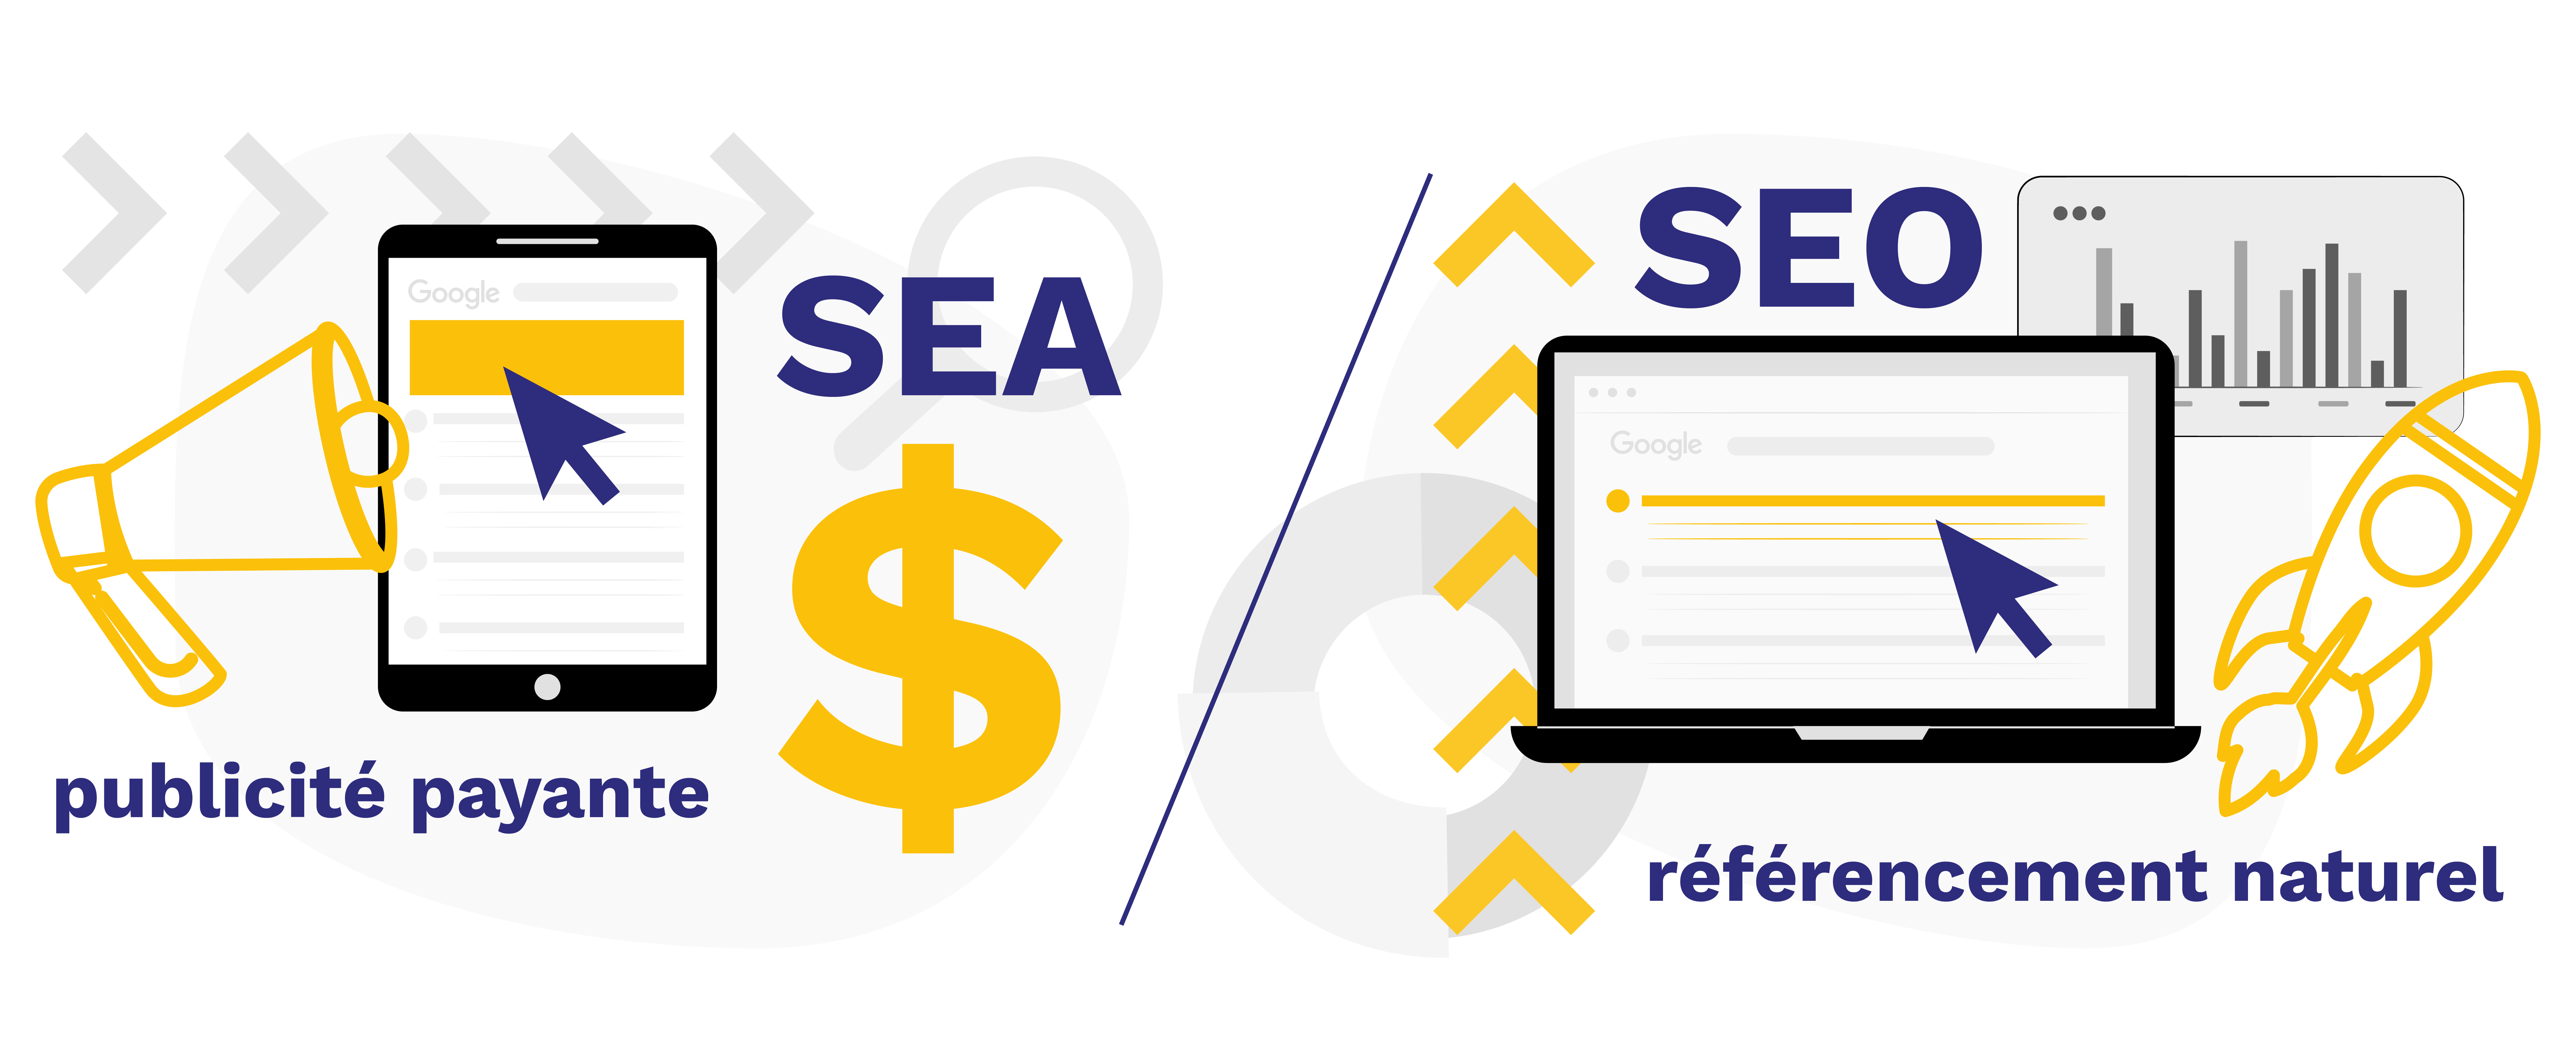 Habefast Page Service Sea Paid Advertising Sea Or Seo